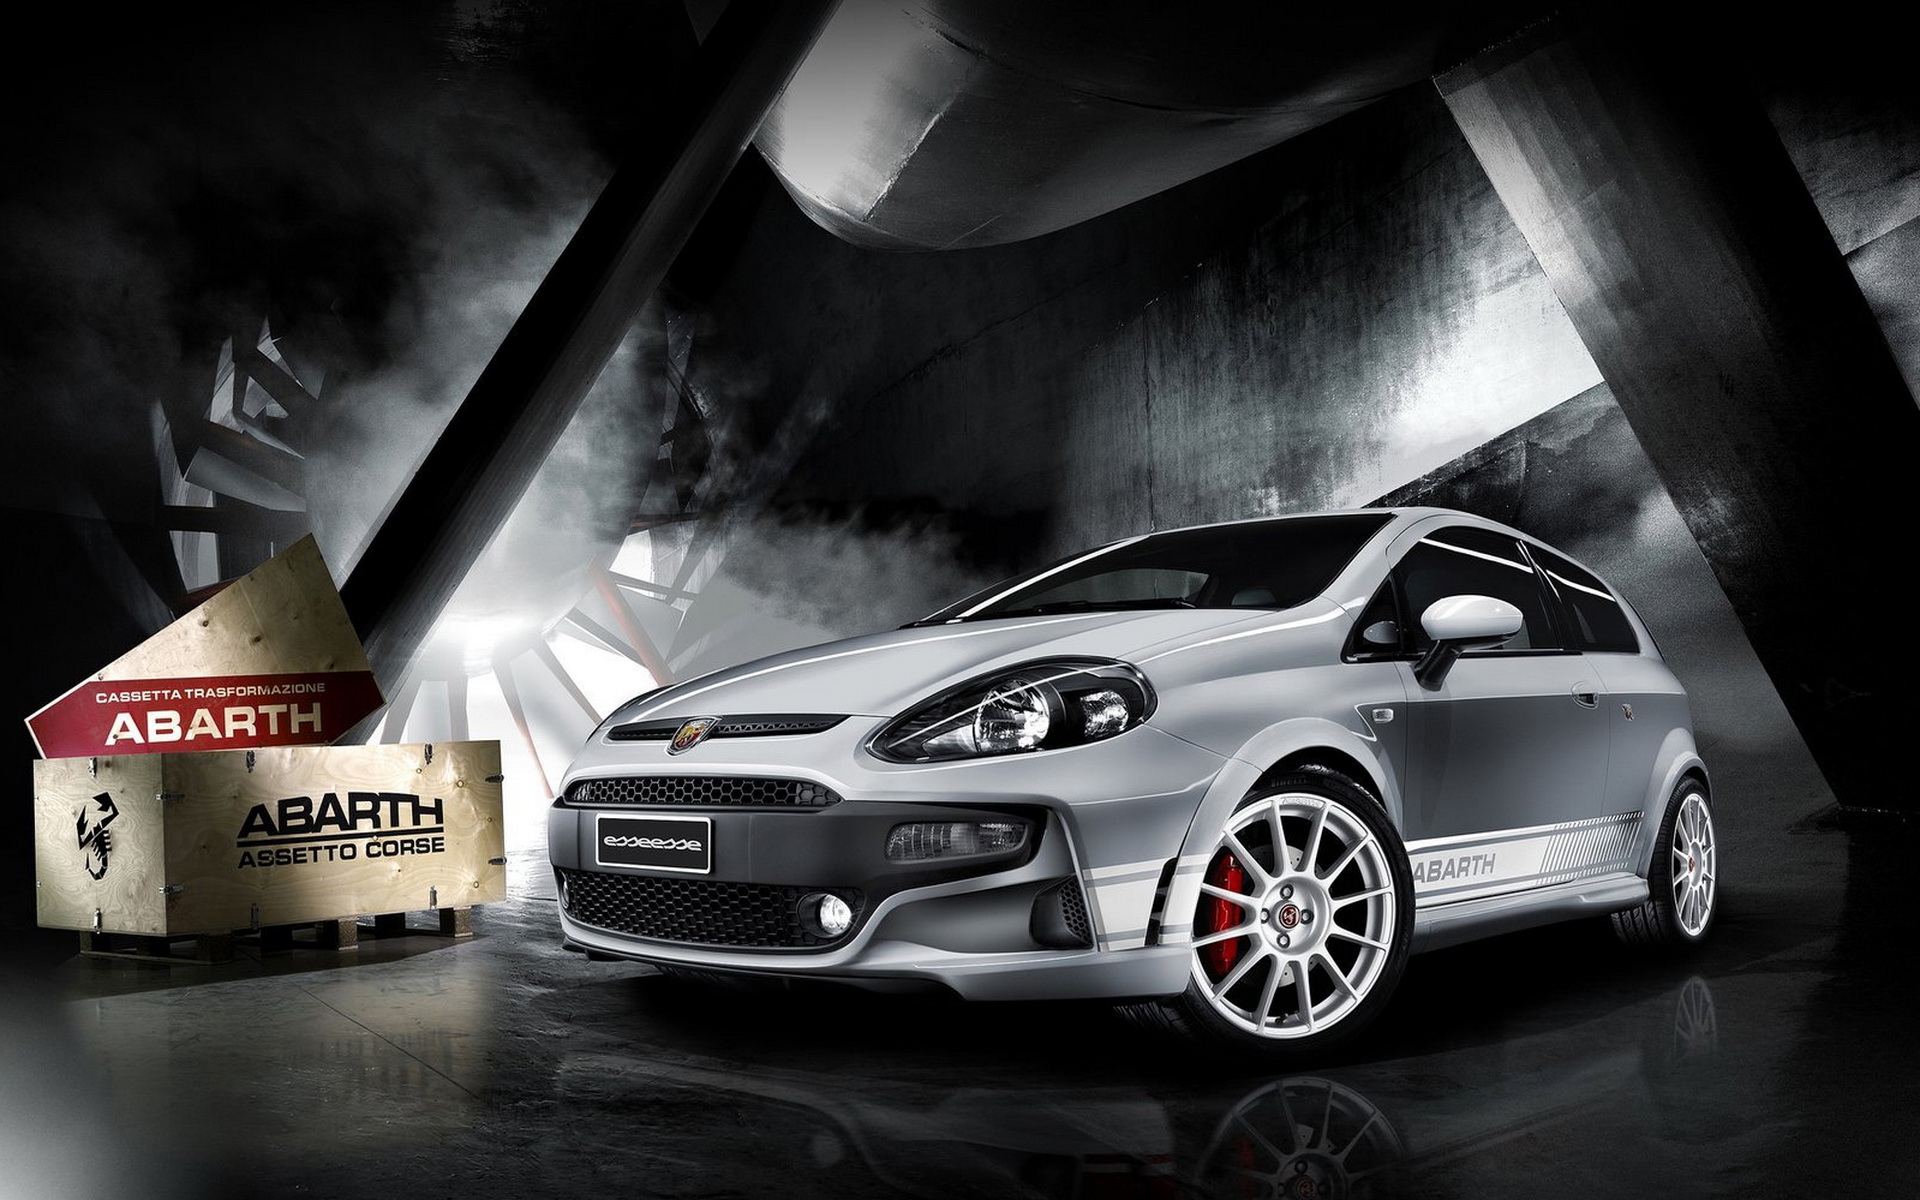 New Fiat Punto Evo Abarth Wallpapers And Images - Abarth Punto Evo , HD Wallpaper & Backgrounds